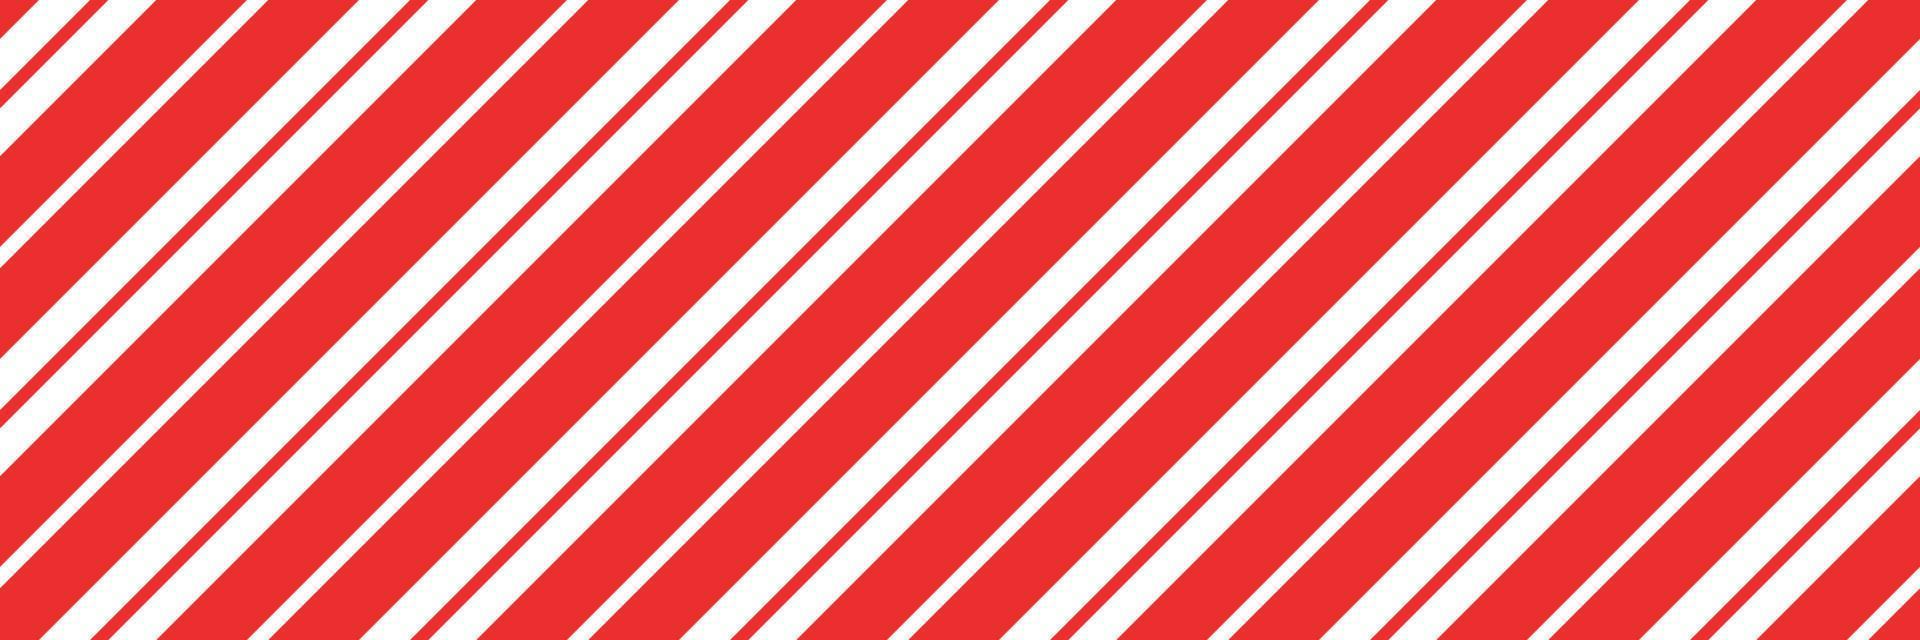 Christmas candy cane striped seamless pattern. Christmas candycane background with red stripes. Caramel diagonal print. Xmas traditional wrapping texture. Vector illustration